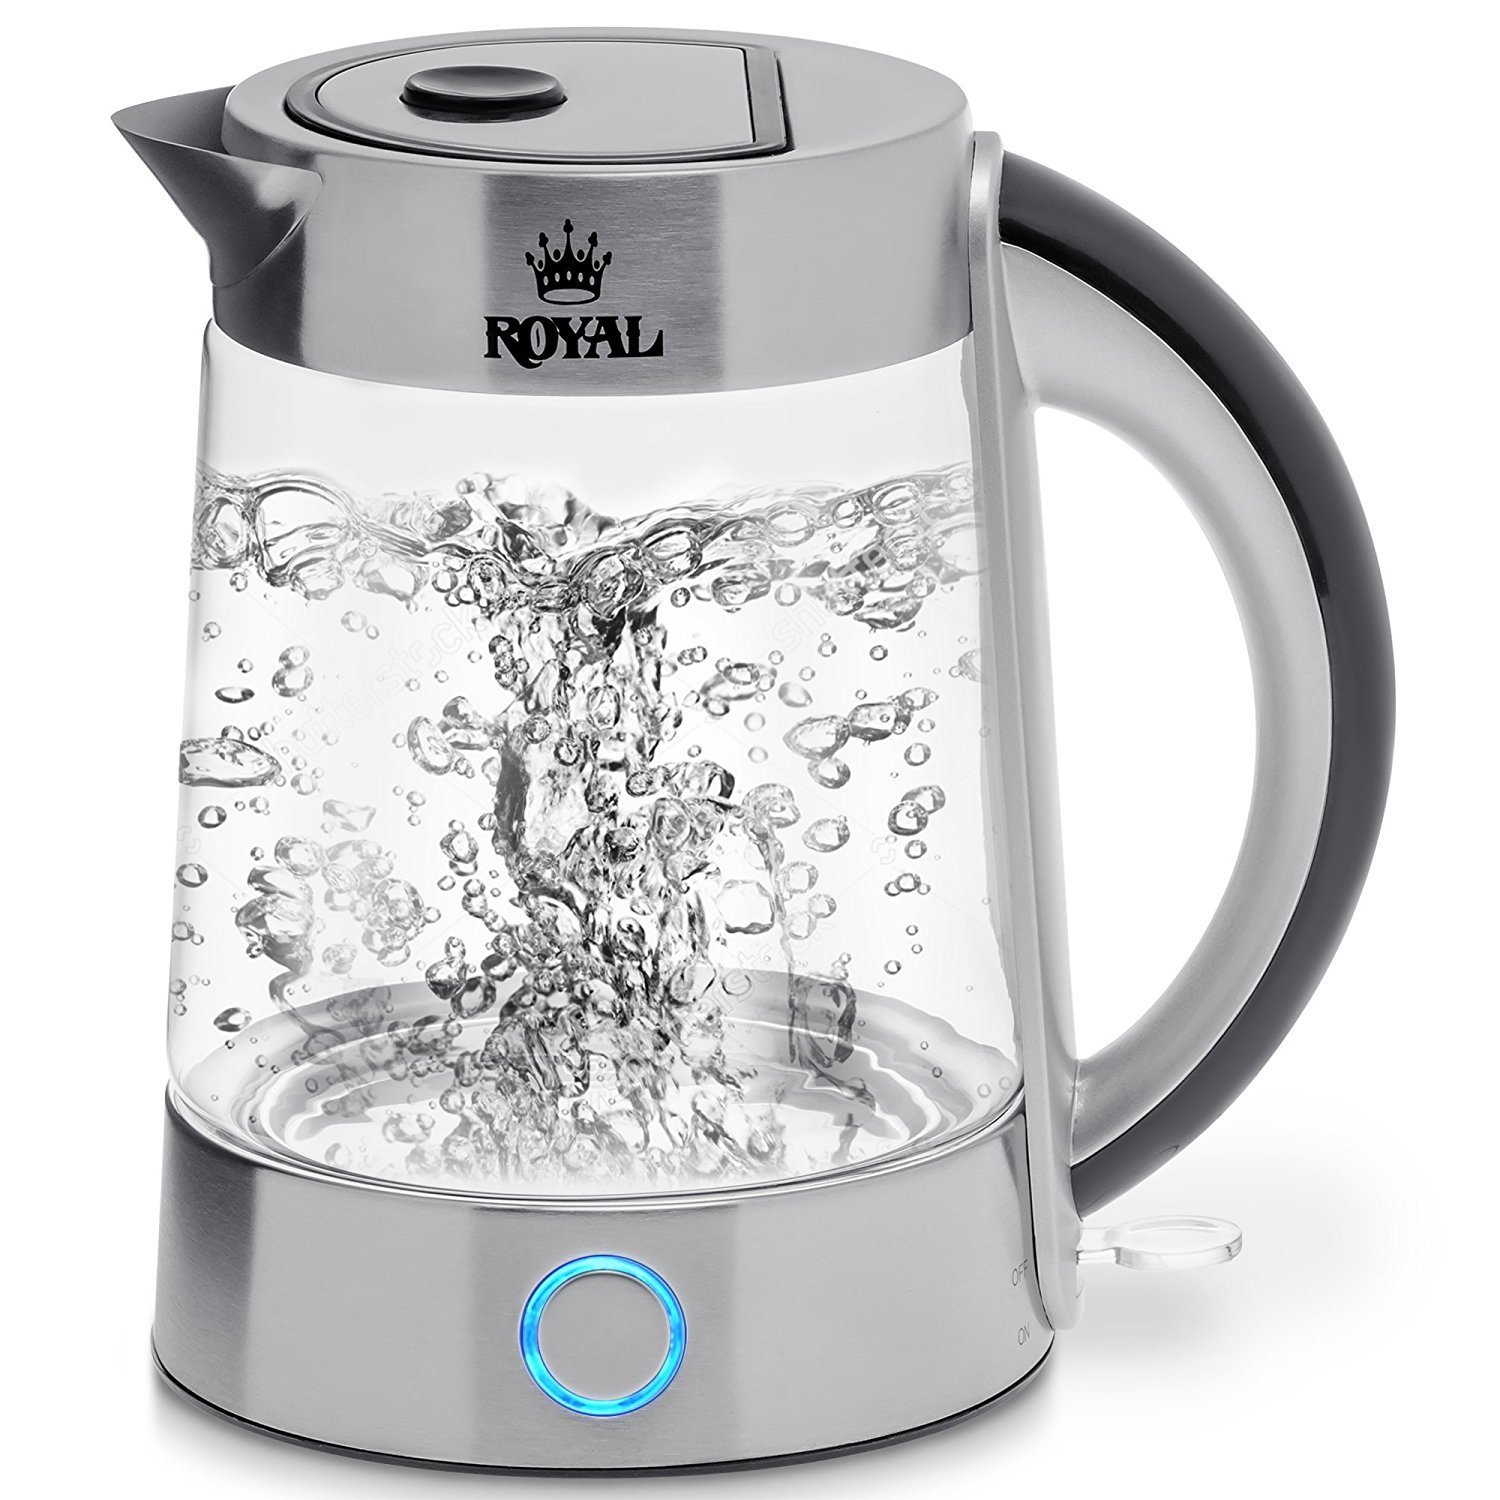 Royal Electric Kettle (BPA Free) - Fast Boiling Glass Tea Kettle (1.7L) Cordless, Stainless Steel Finish Hot Water Kettle – Glass Tea Kettle, Tea Pot – Hot Water Dispenser